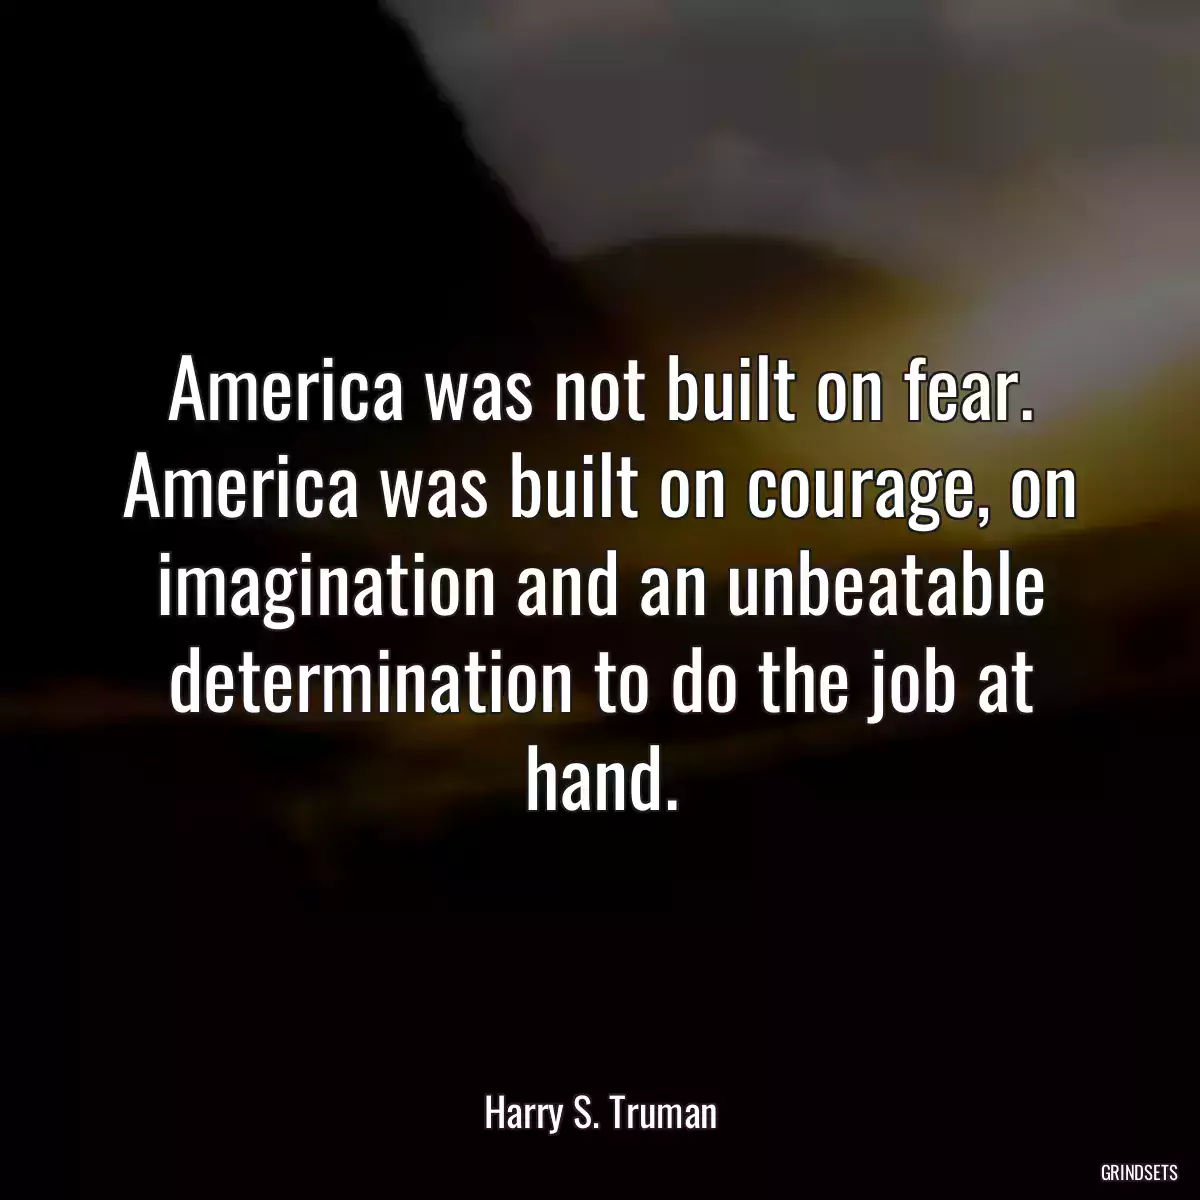 America was not built on fear. America was built on courage, on imagination and an unbeatable determination to do the job at hand.